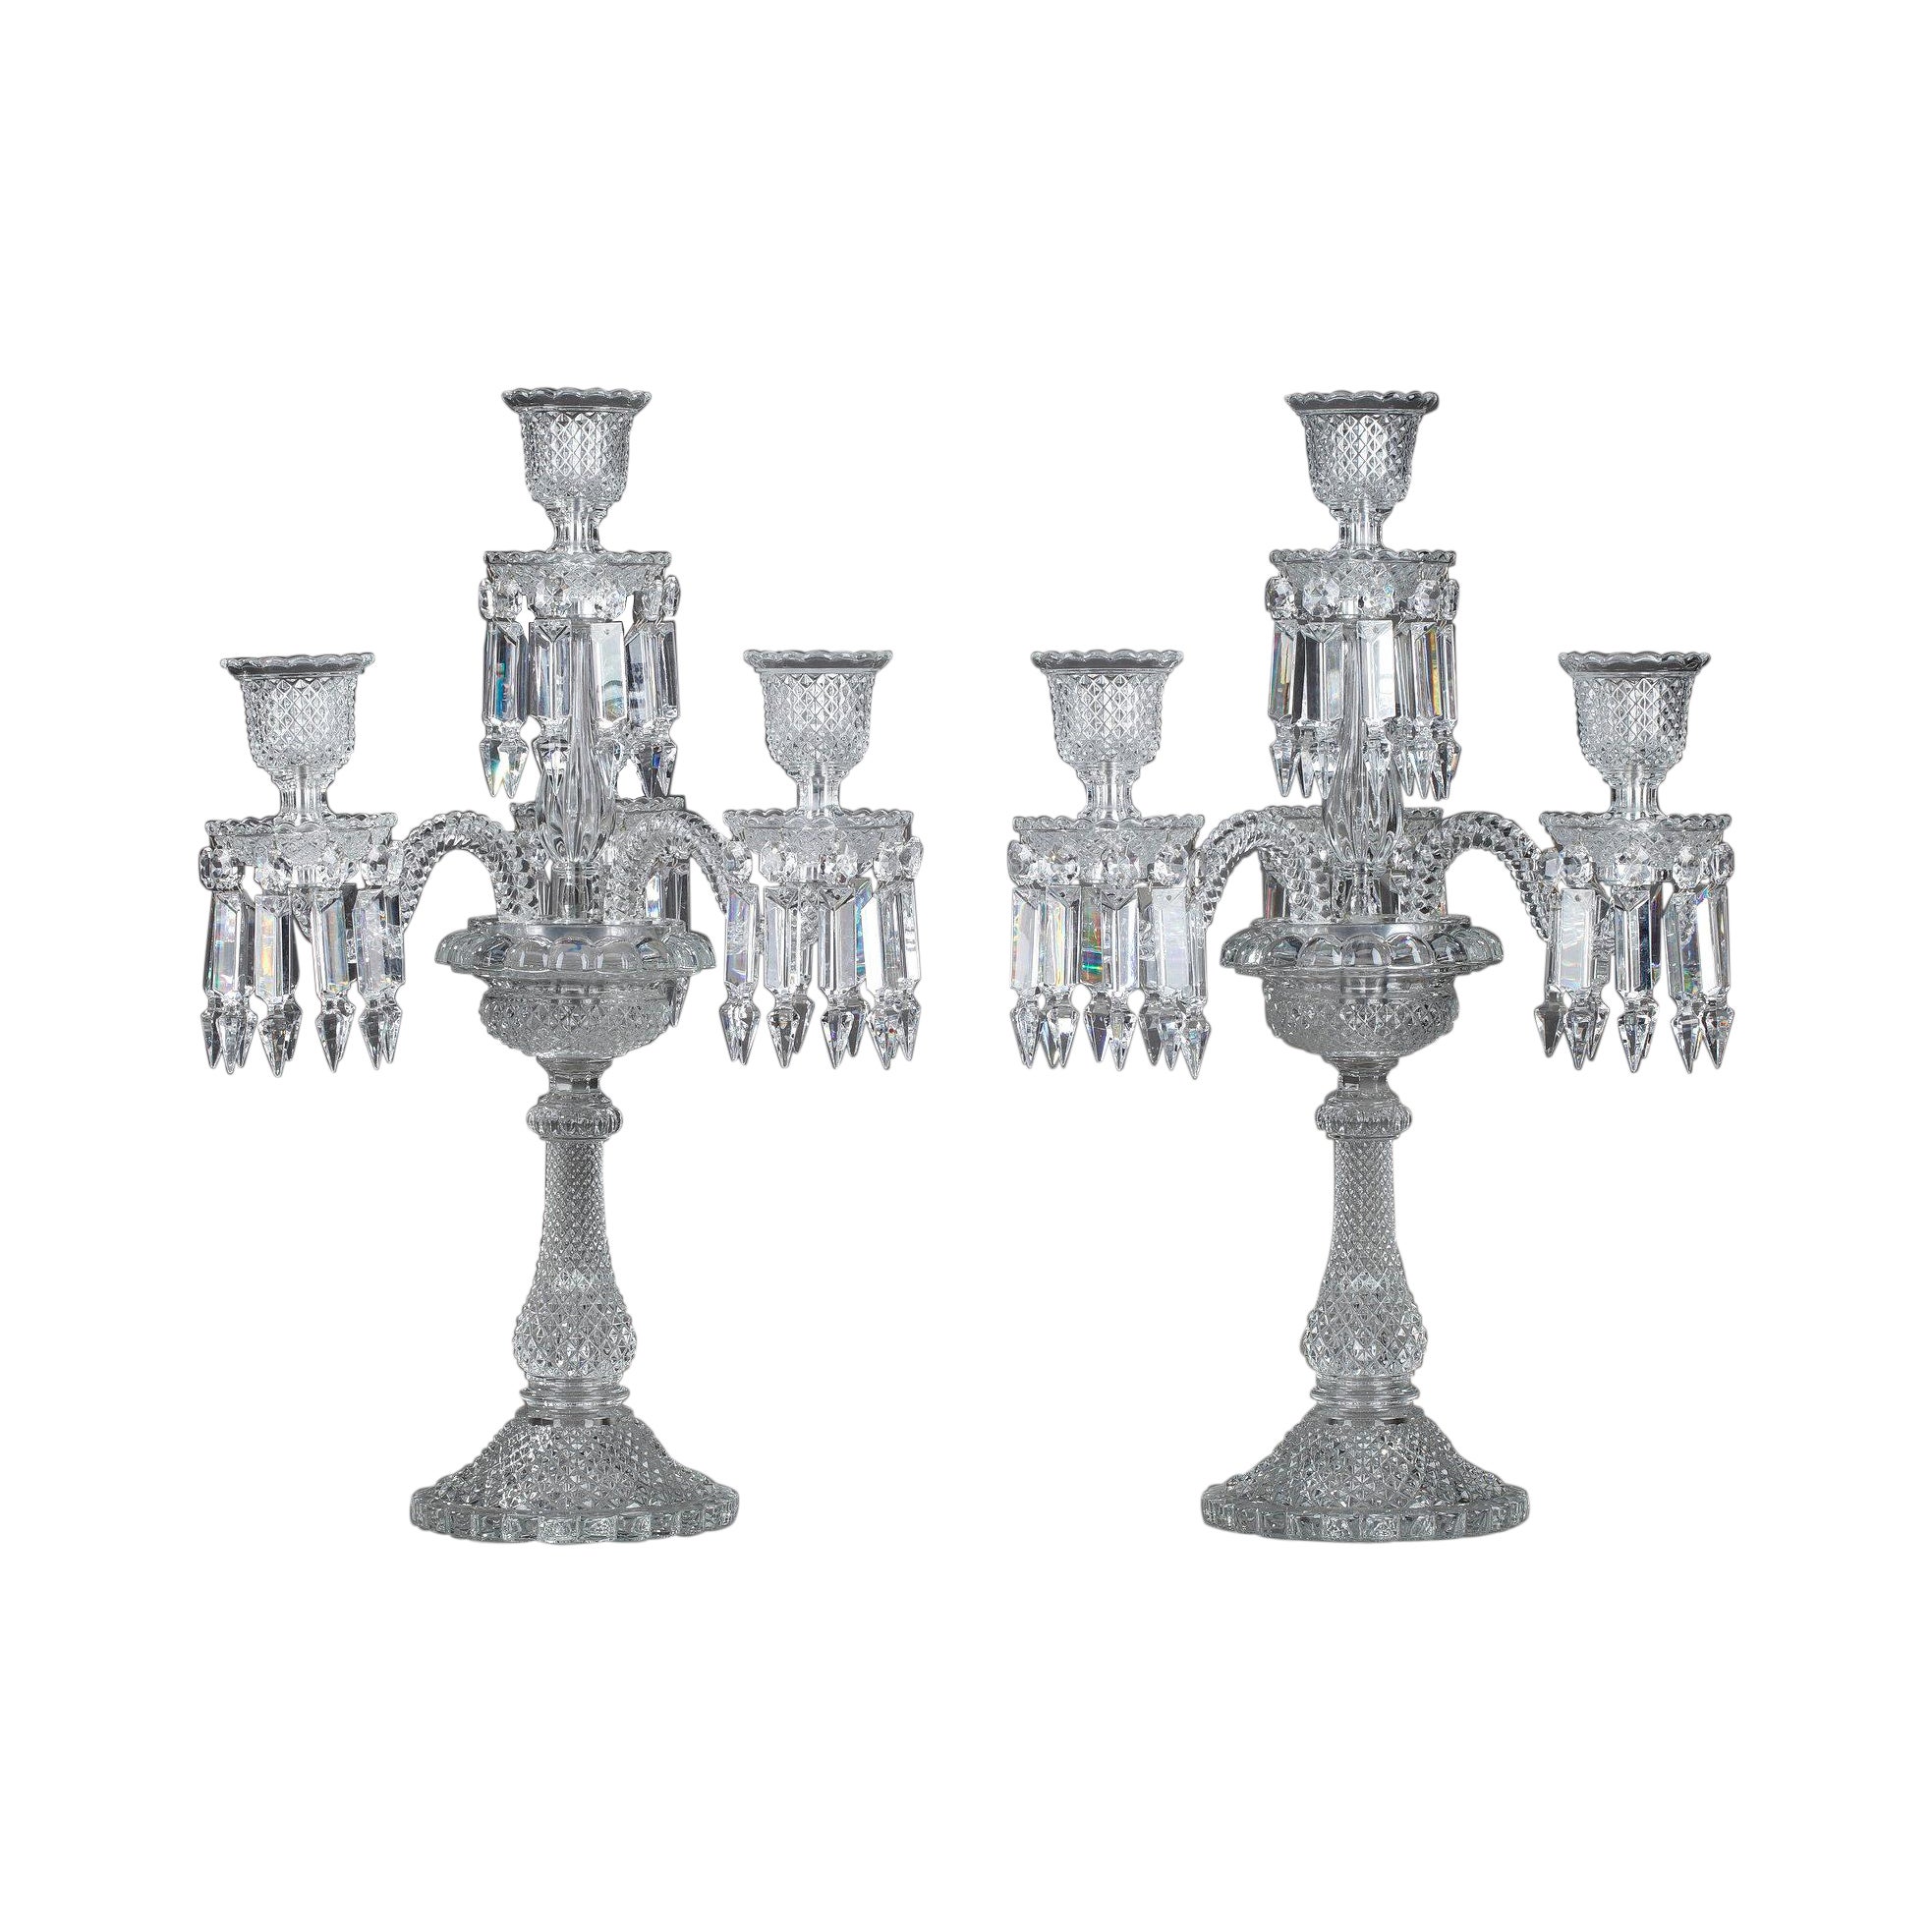 Pair of Baccarat Candelabras in Molded Crystal with Four Lights